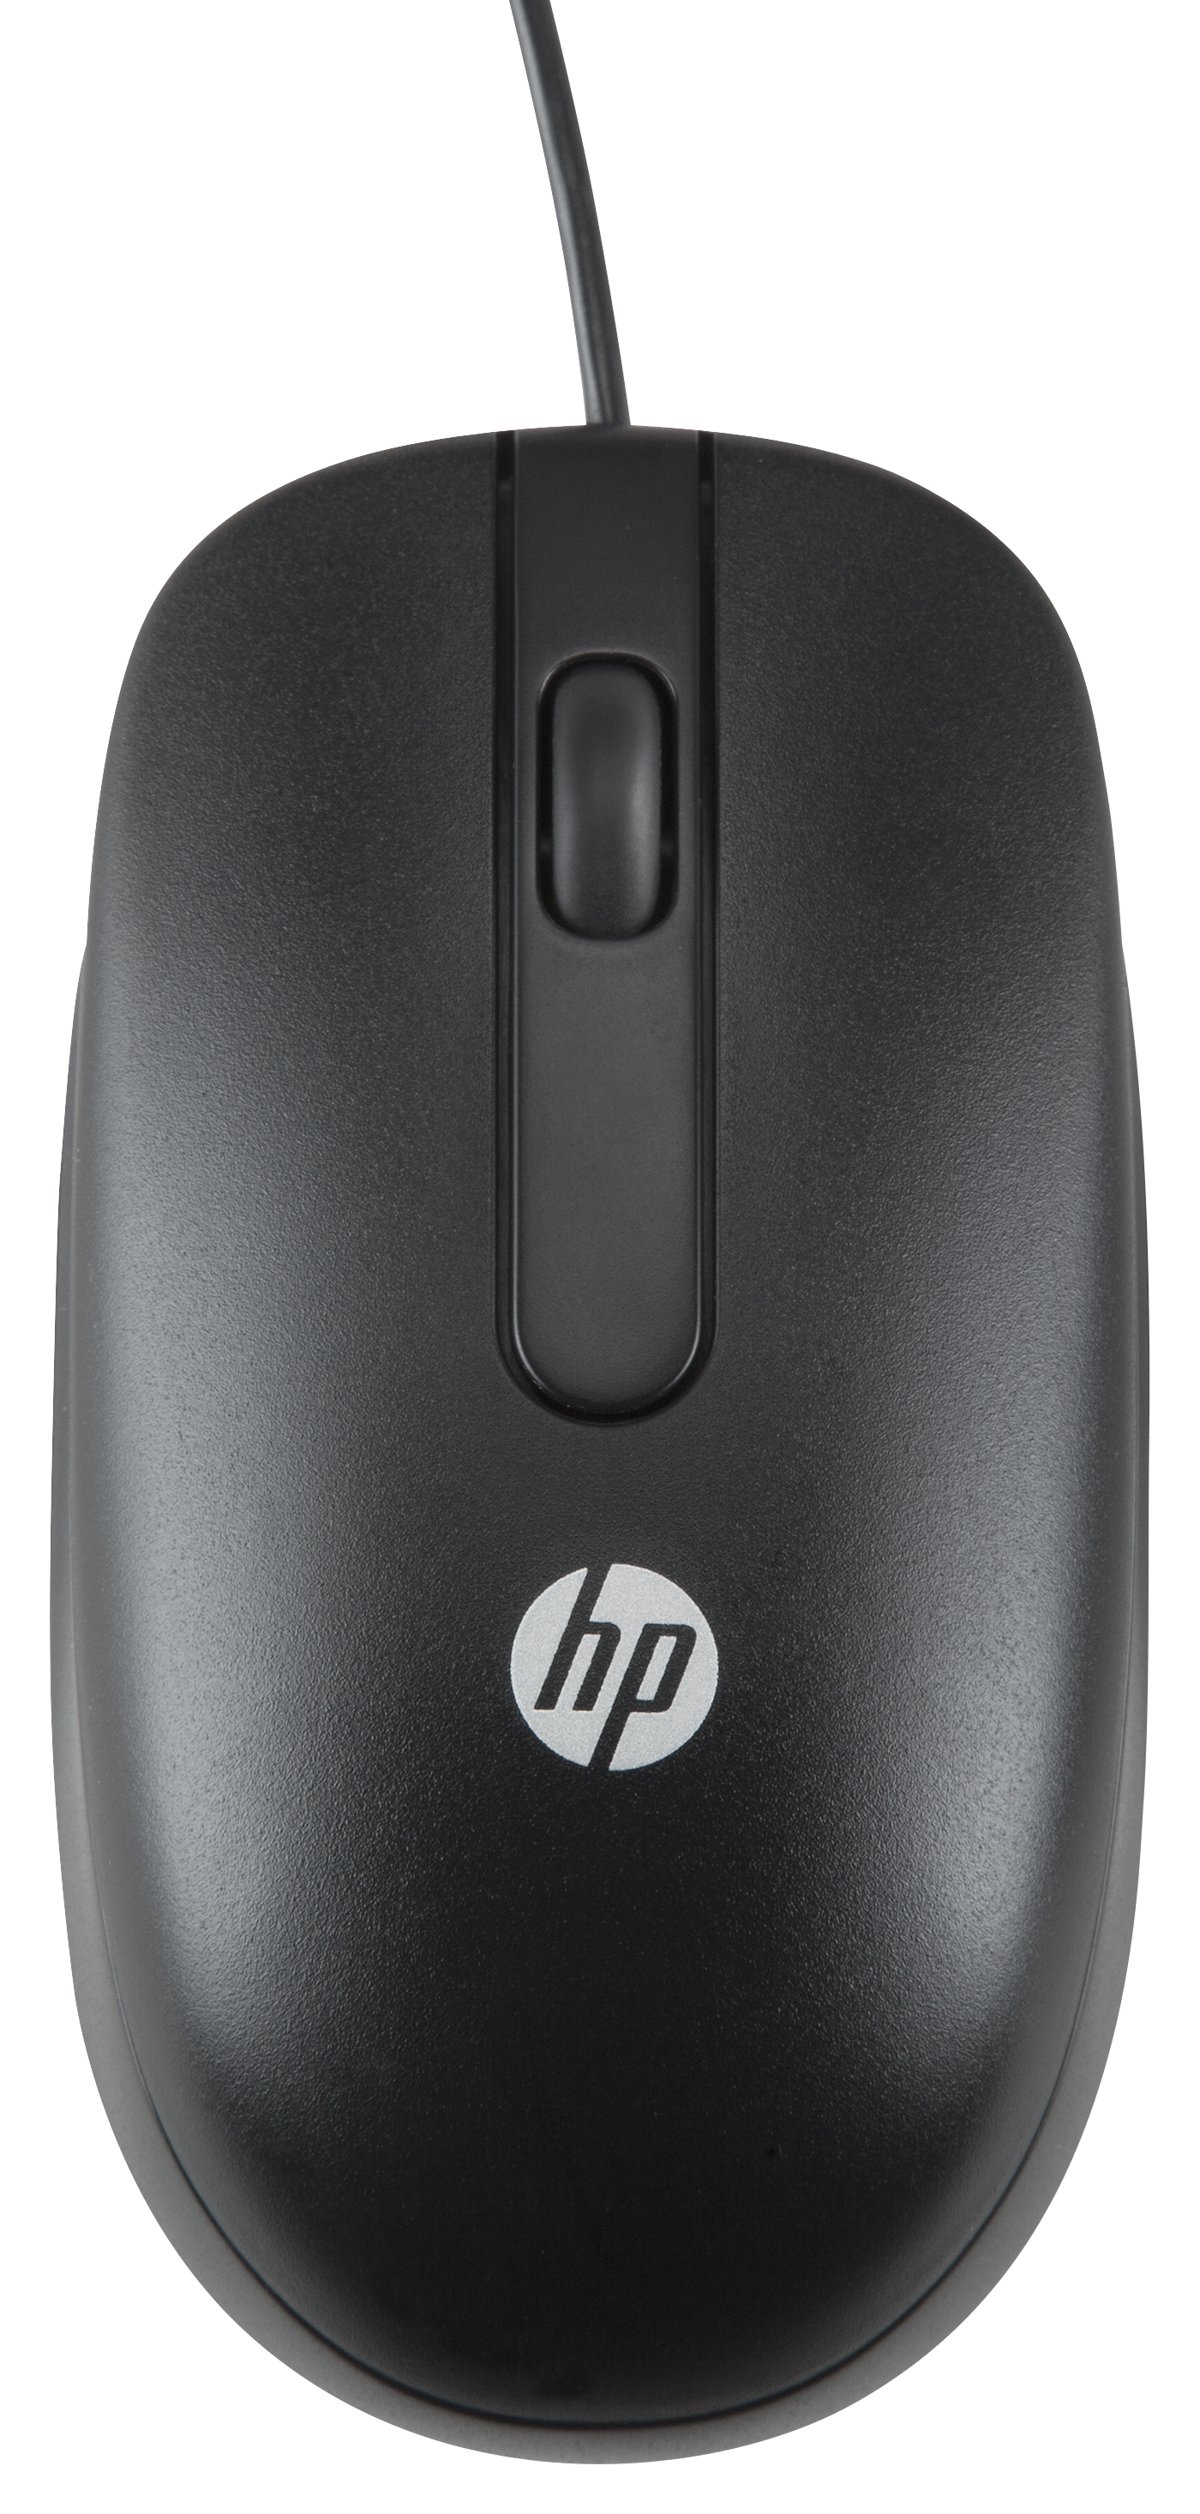 slide 1 of 2, show larger image, hp usb optical scroll mouse